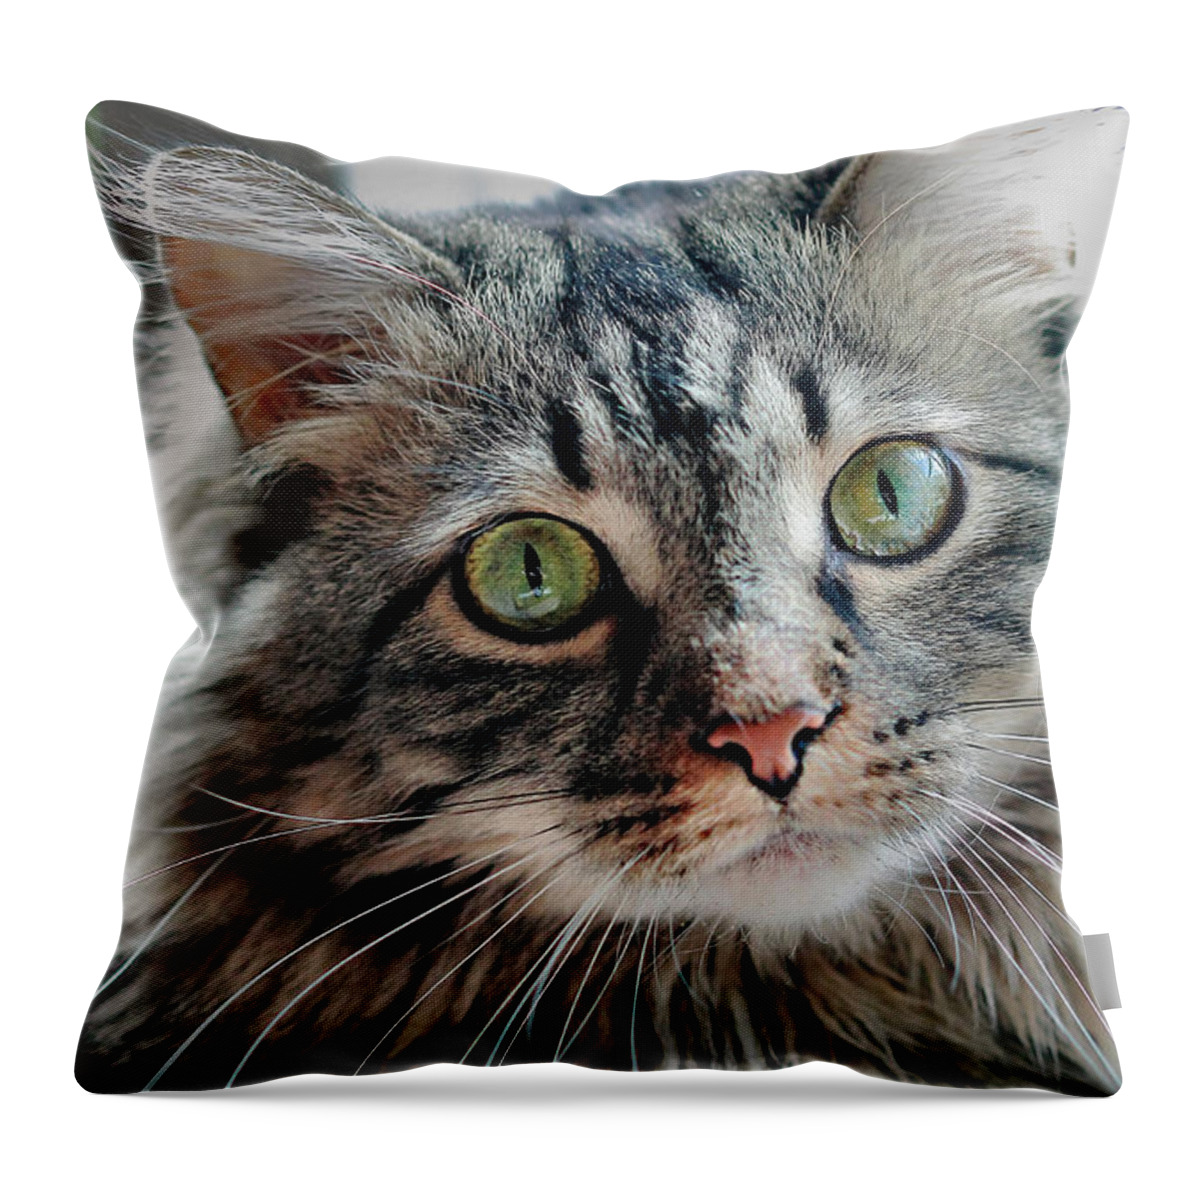 Maine Coon Throw Pillow featuring the photograph Maine Coon Portrait by Angela Murdock